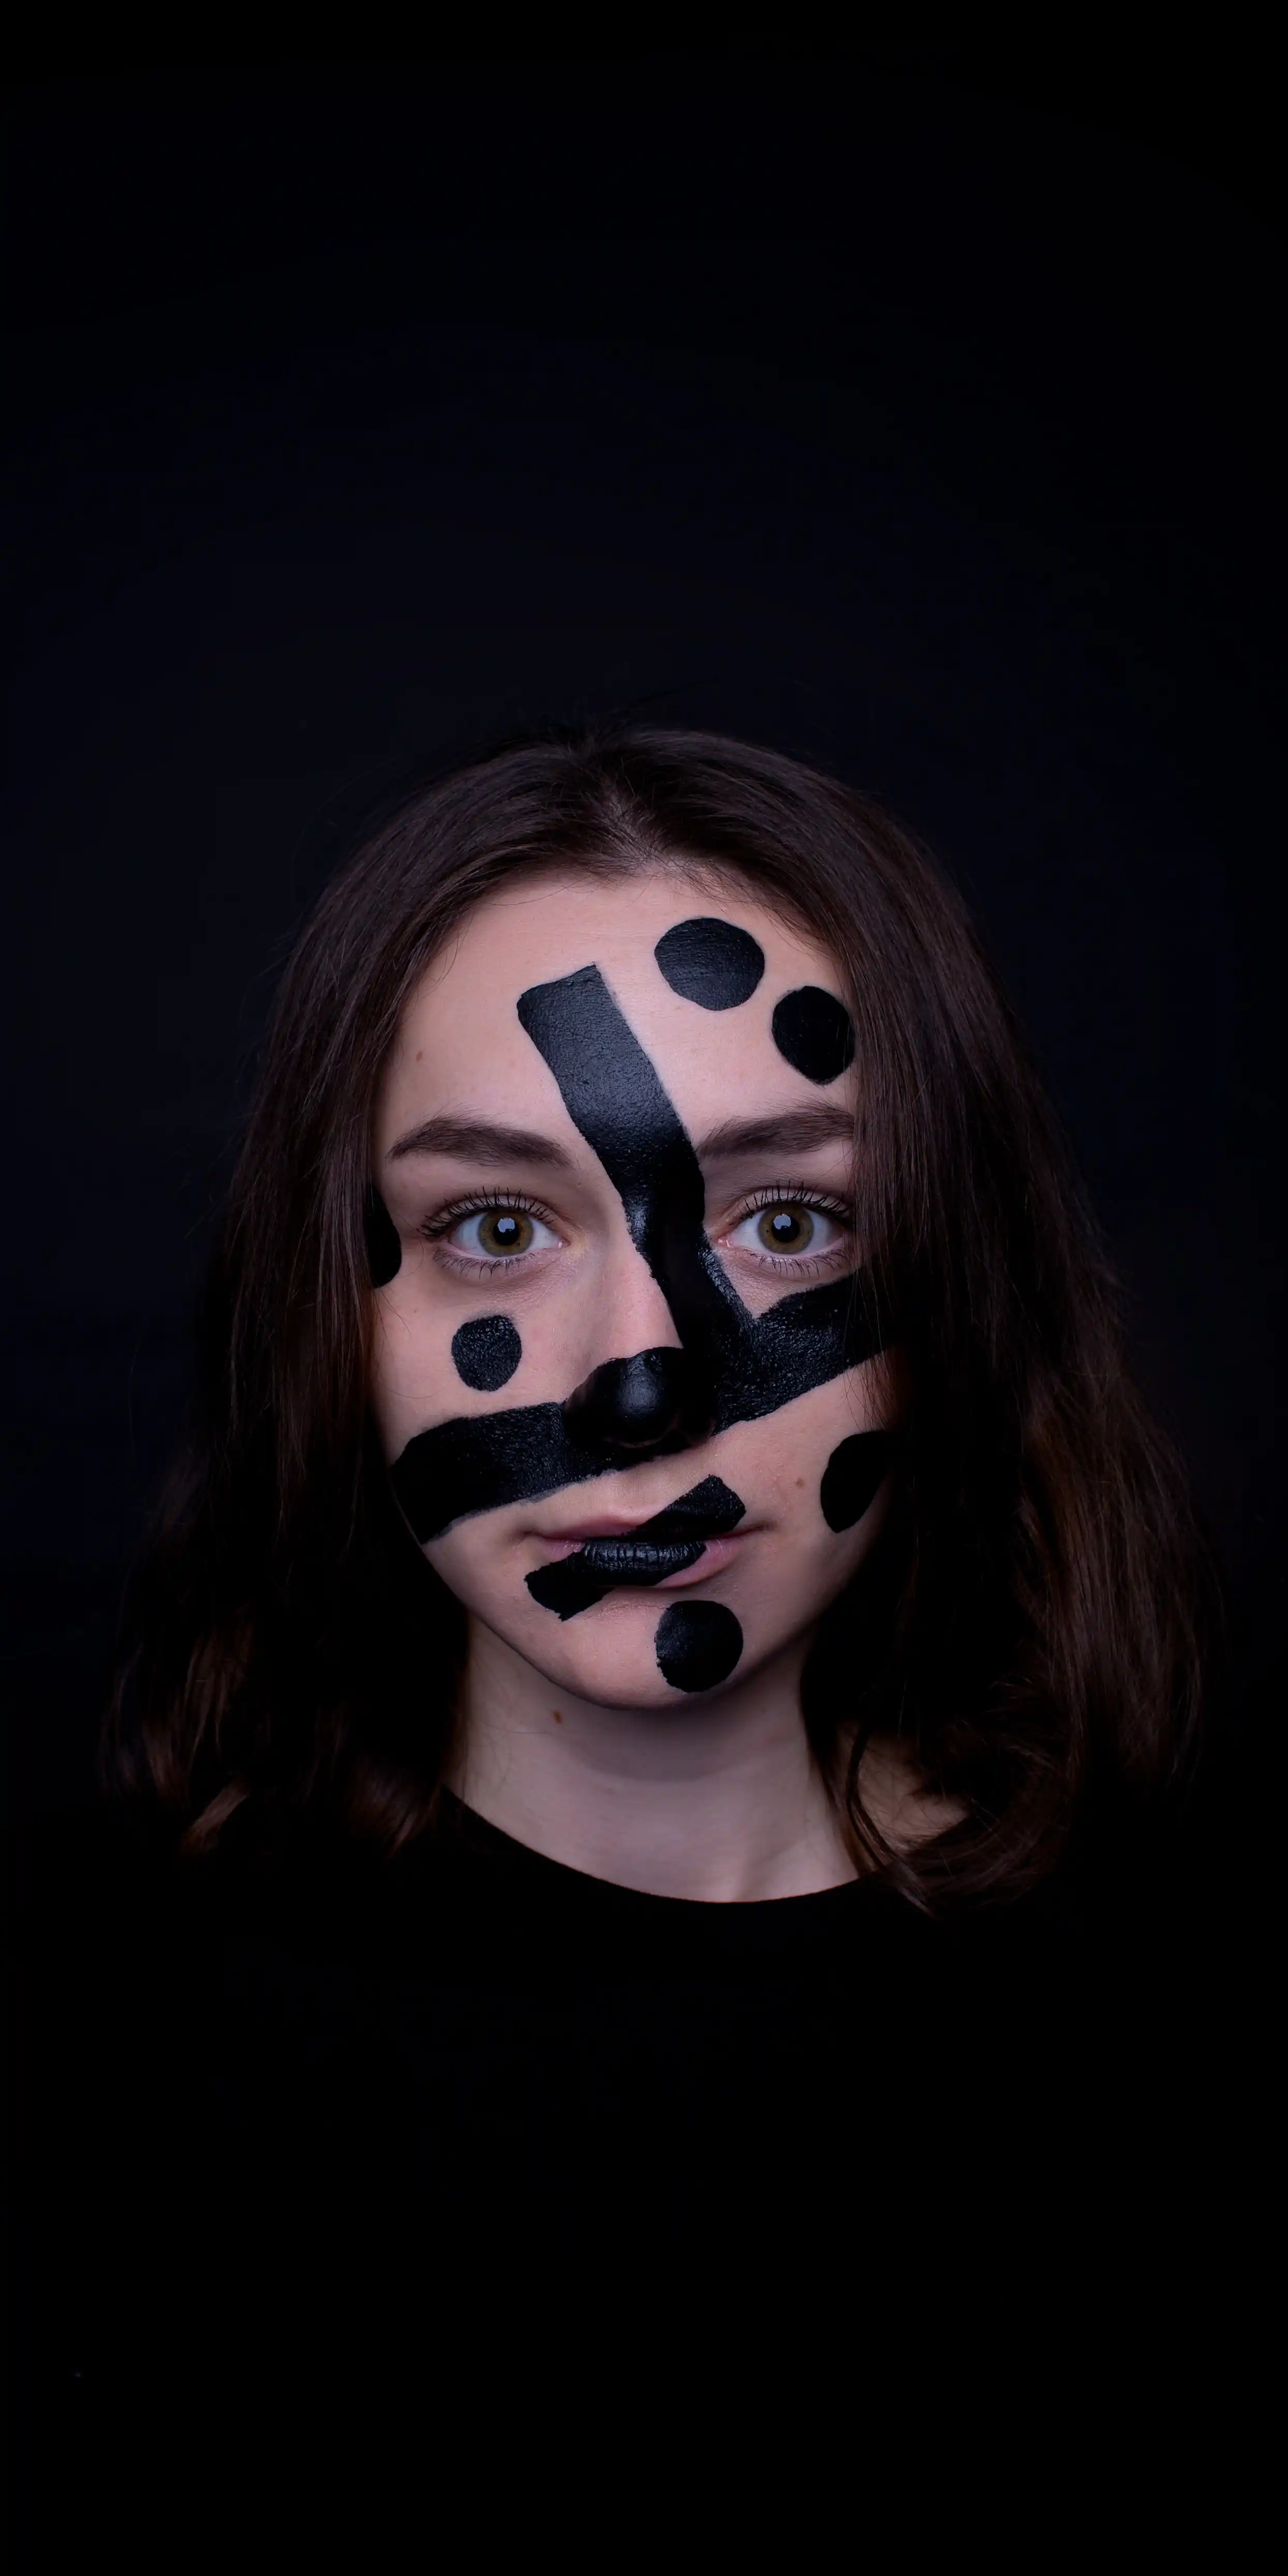 A model with dotted facepaint